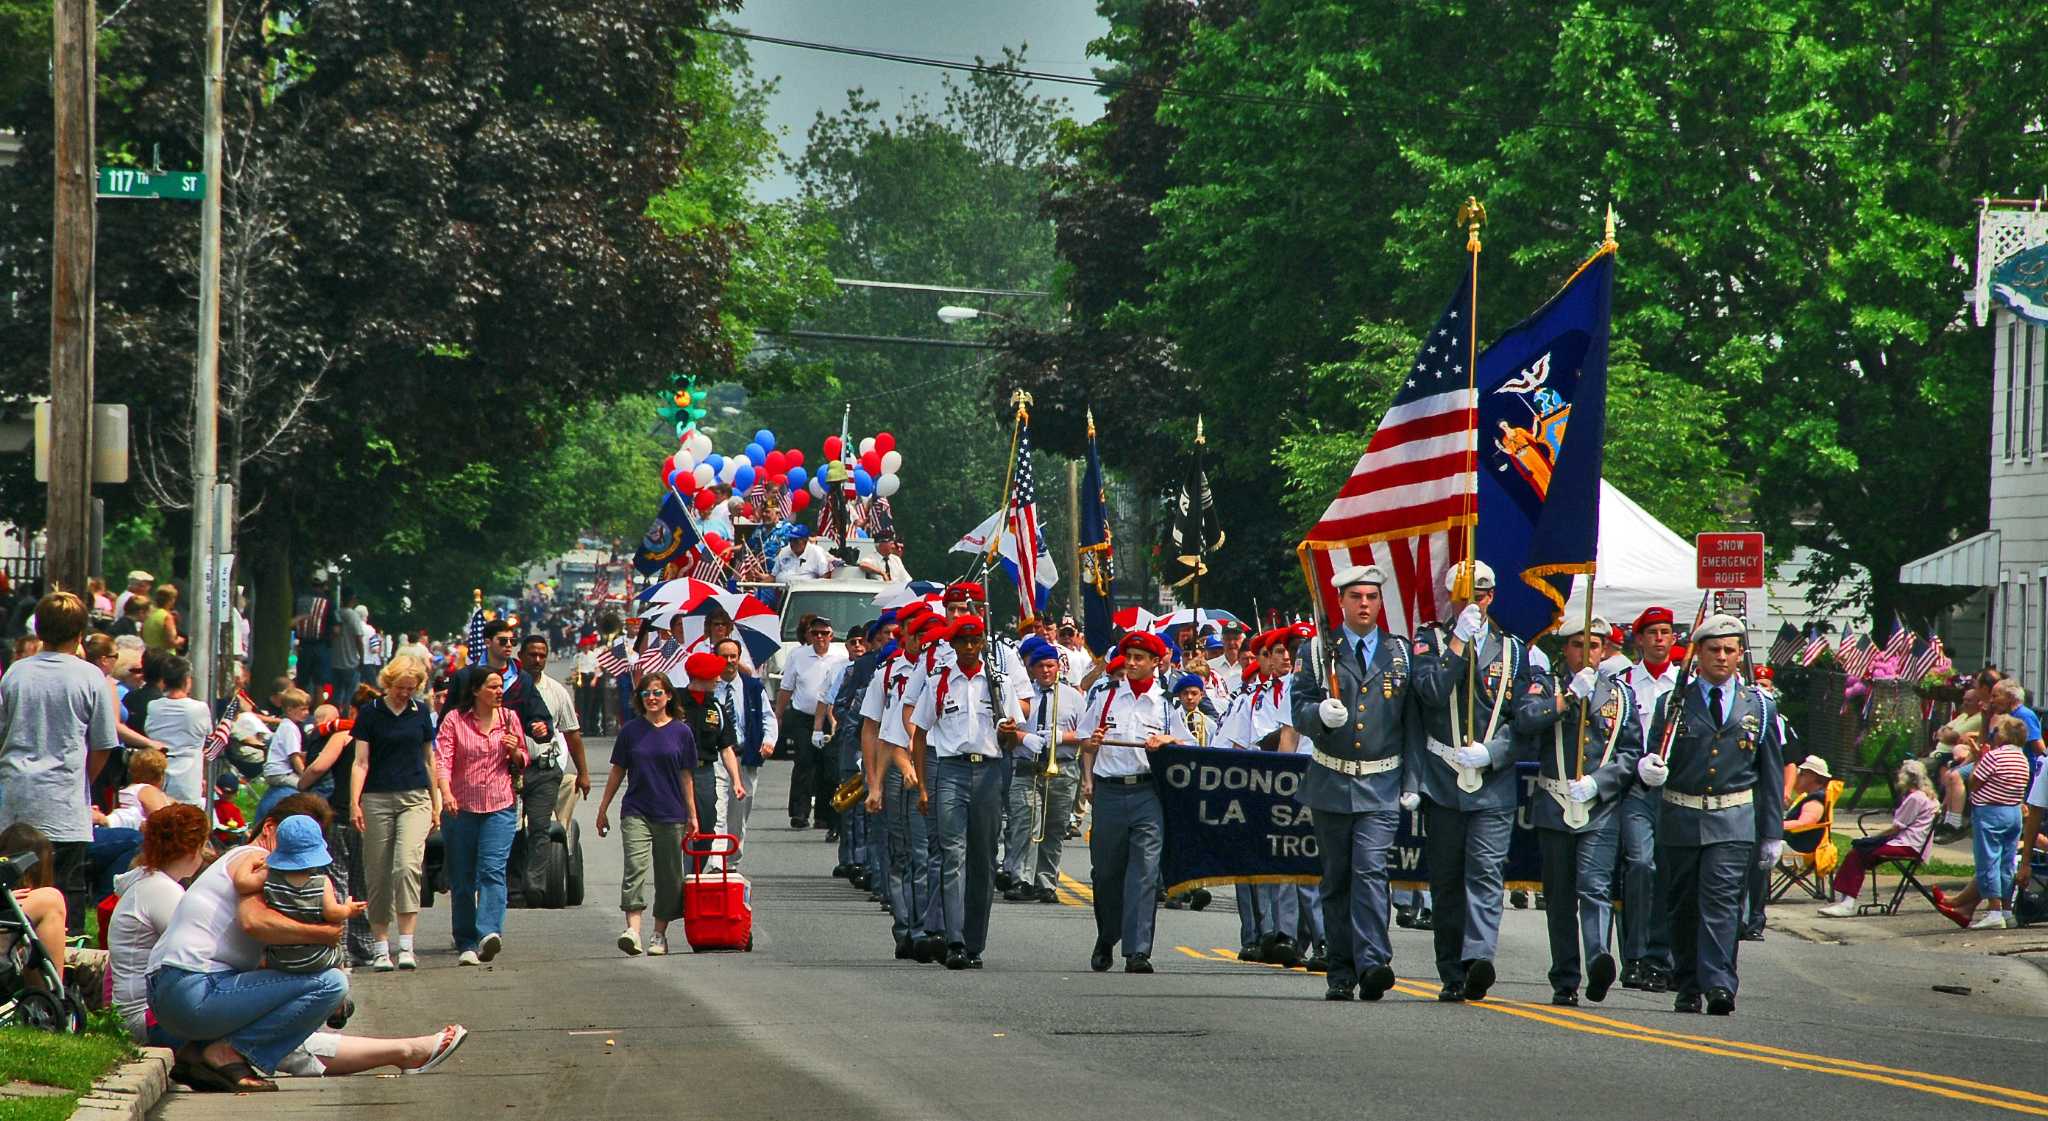 Troy parade honors those killed in service